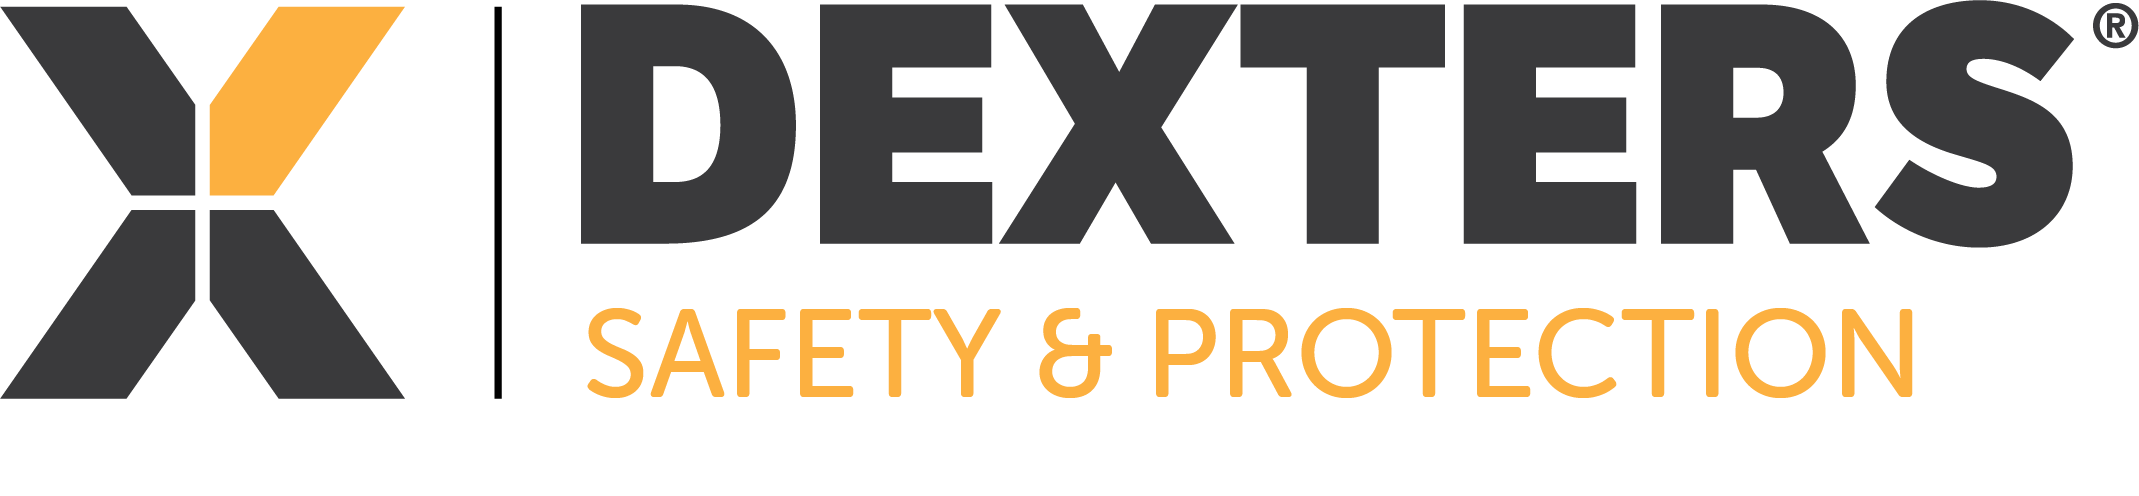 Dexters Saftey Protection Yellow Logo